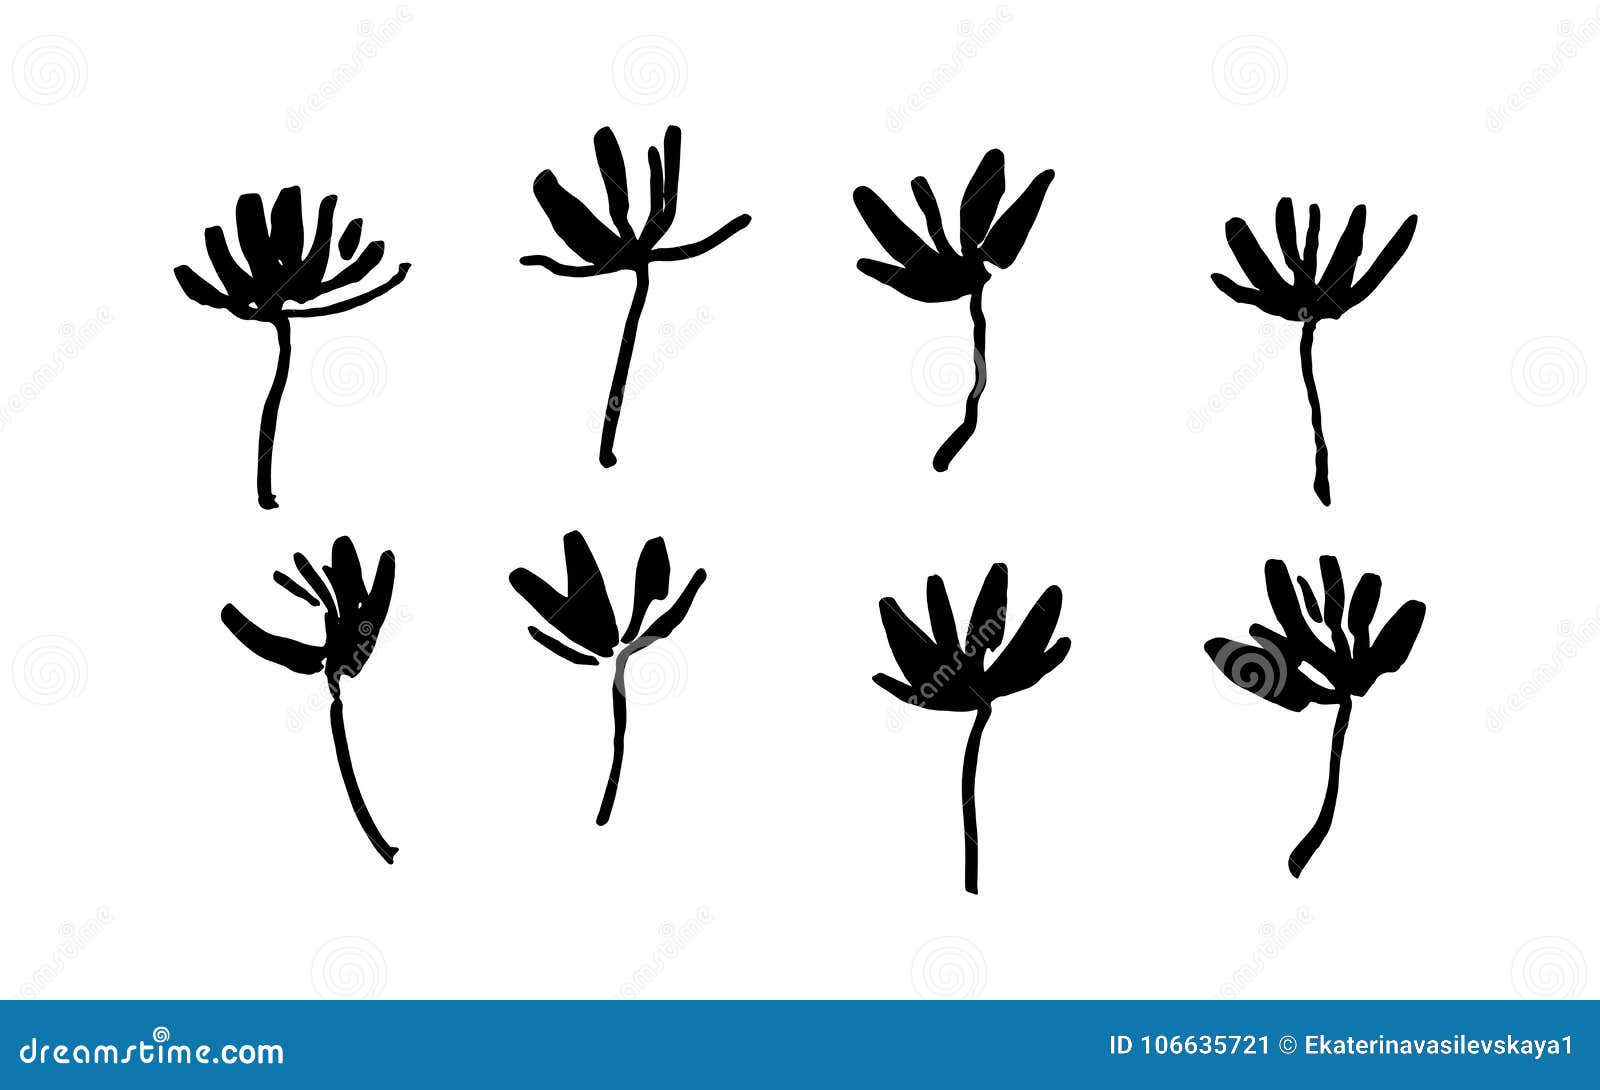 Set Of Hand Drawn Simple Brush Paint Flowers Painted By Ink Grunge Style Elements Black Isolated Vector On White Background Stock Vector Illustration Of Isolated Graphic 106635721,Ga Geijutsuka Art Design Class Osaki Ni Sil Vous Plait